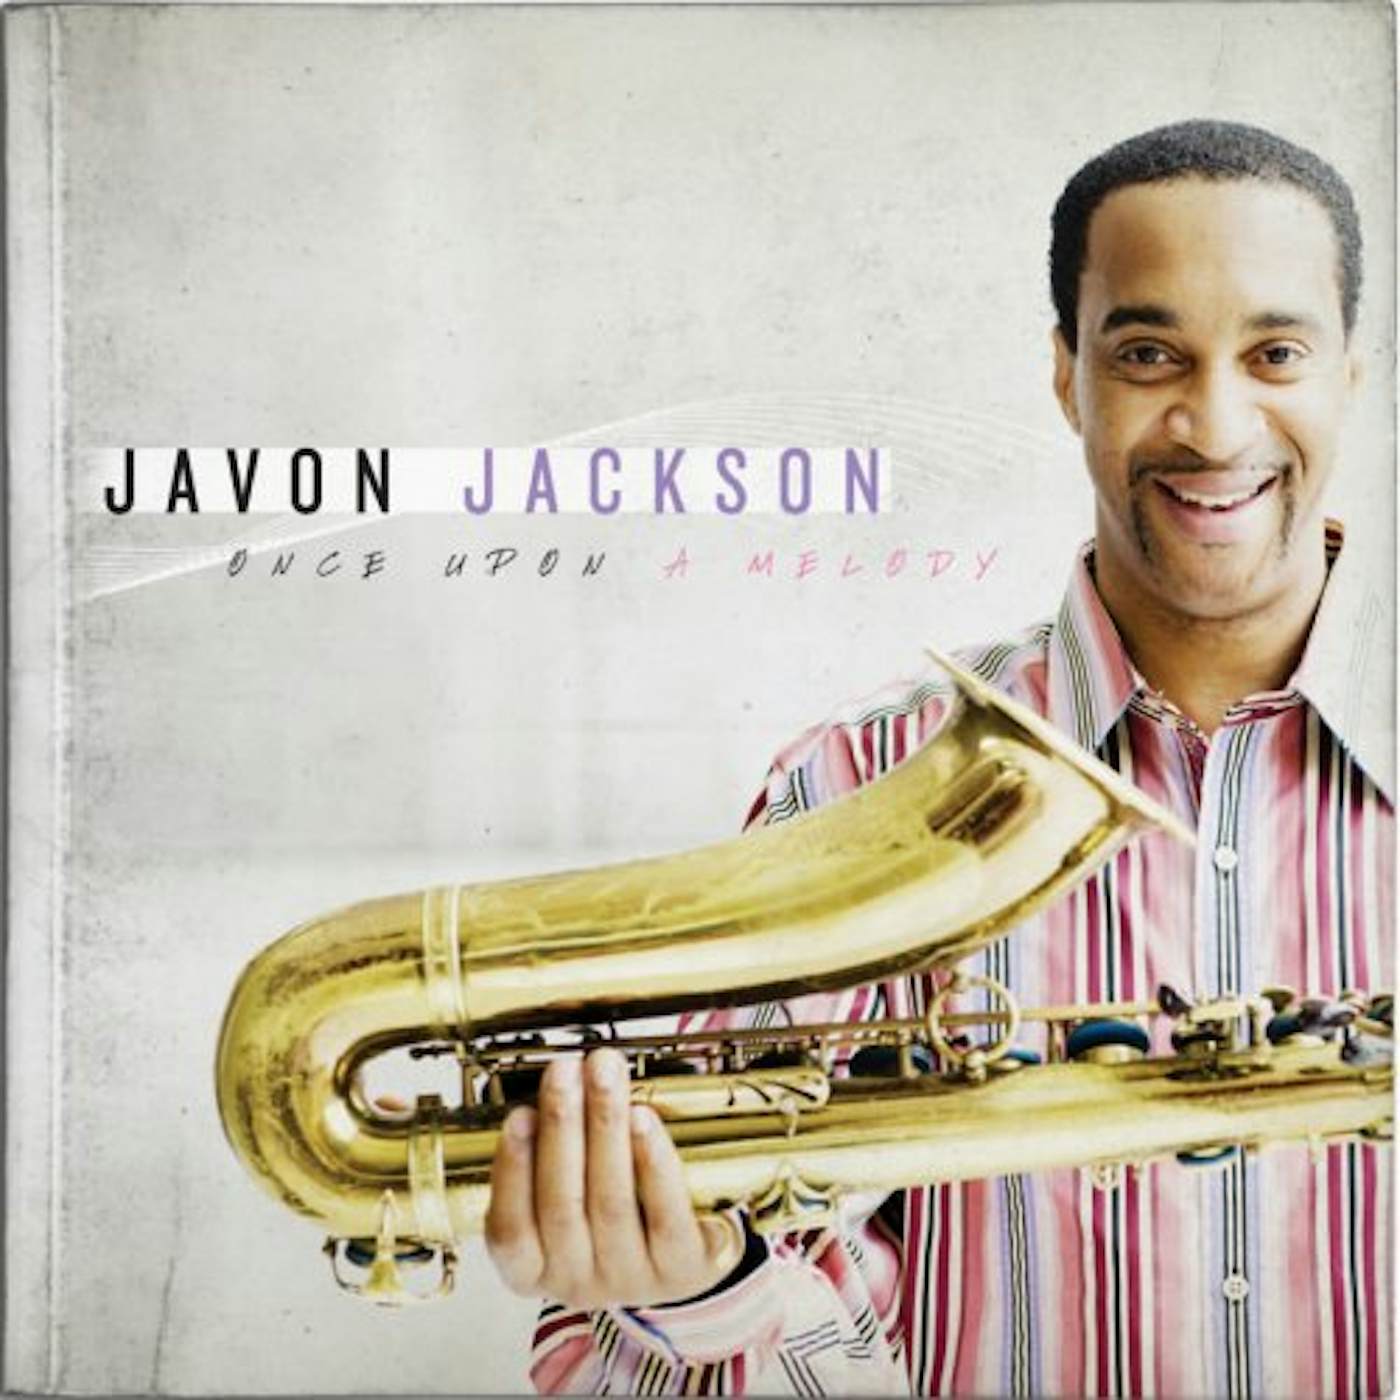 Javon Jackson ONCE UPON A MELODY CD